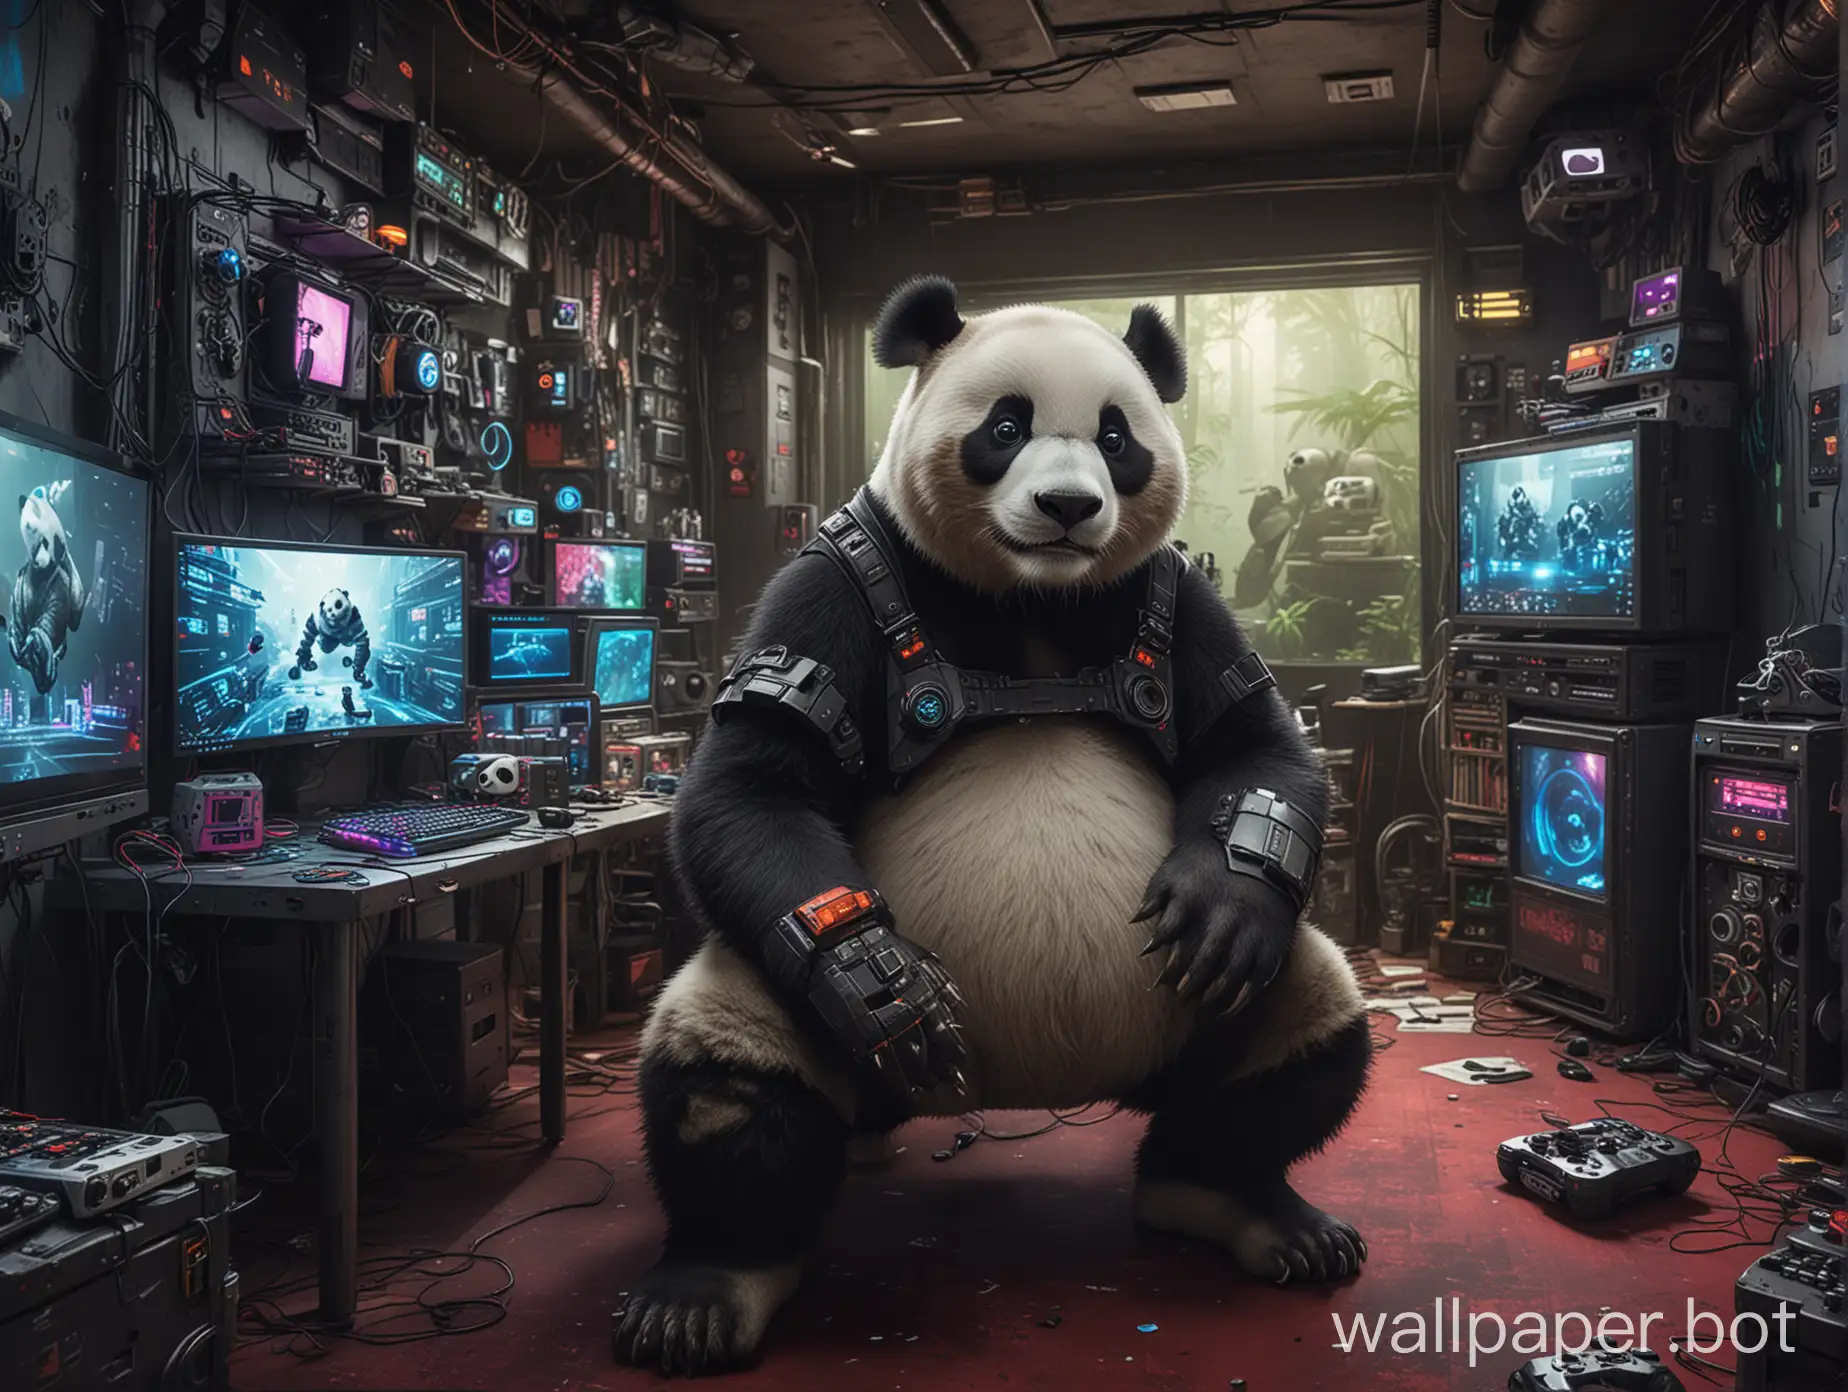 A Panda playing video games in a gaming room filled with electronics and cyberpunk devices